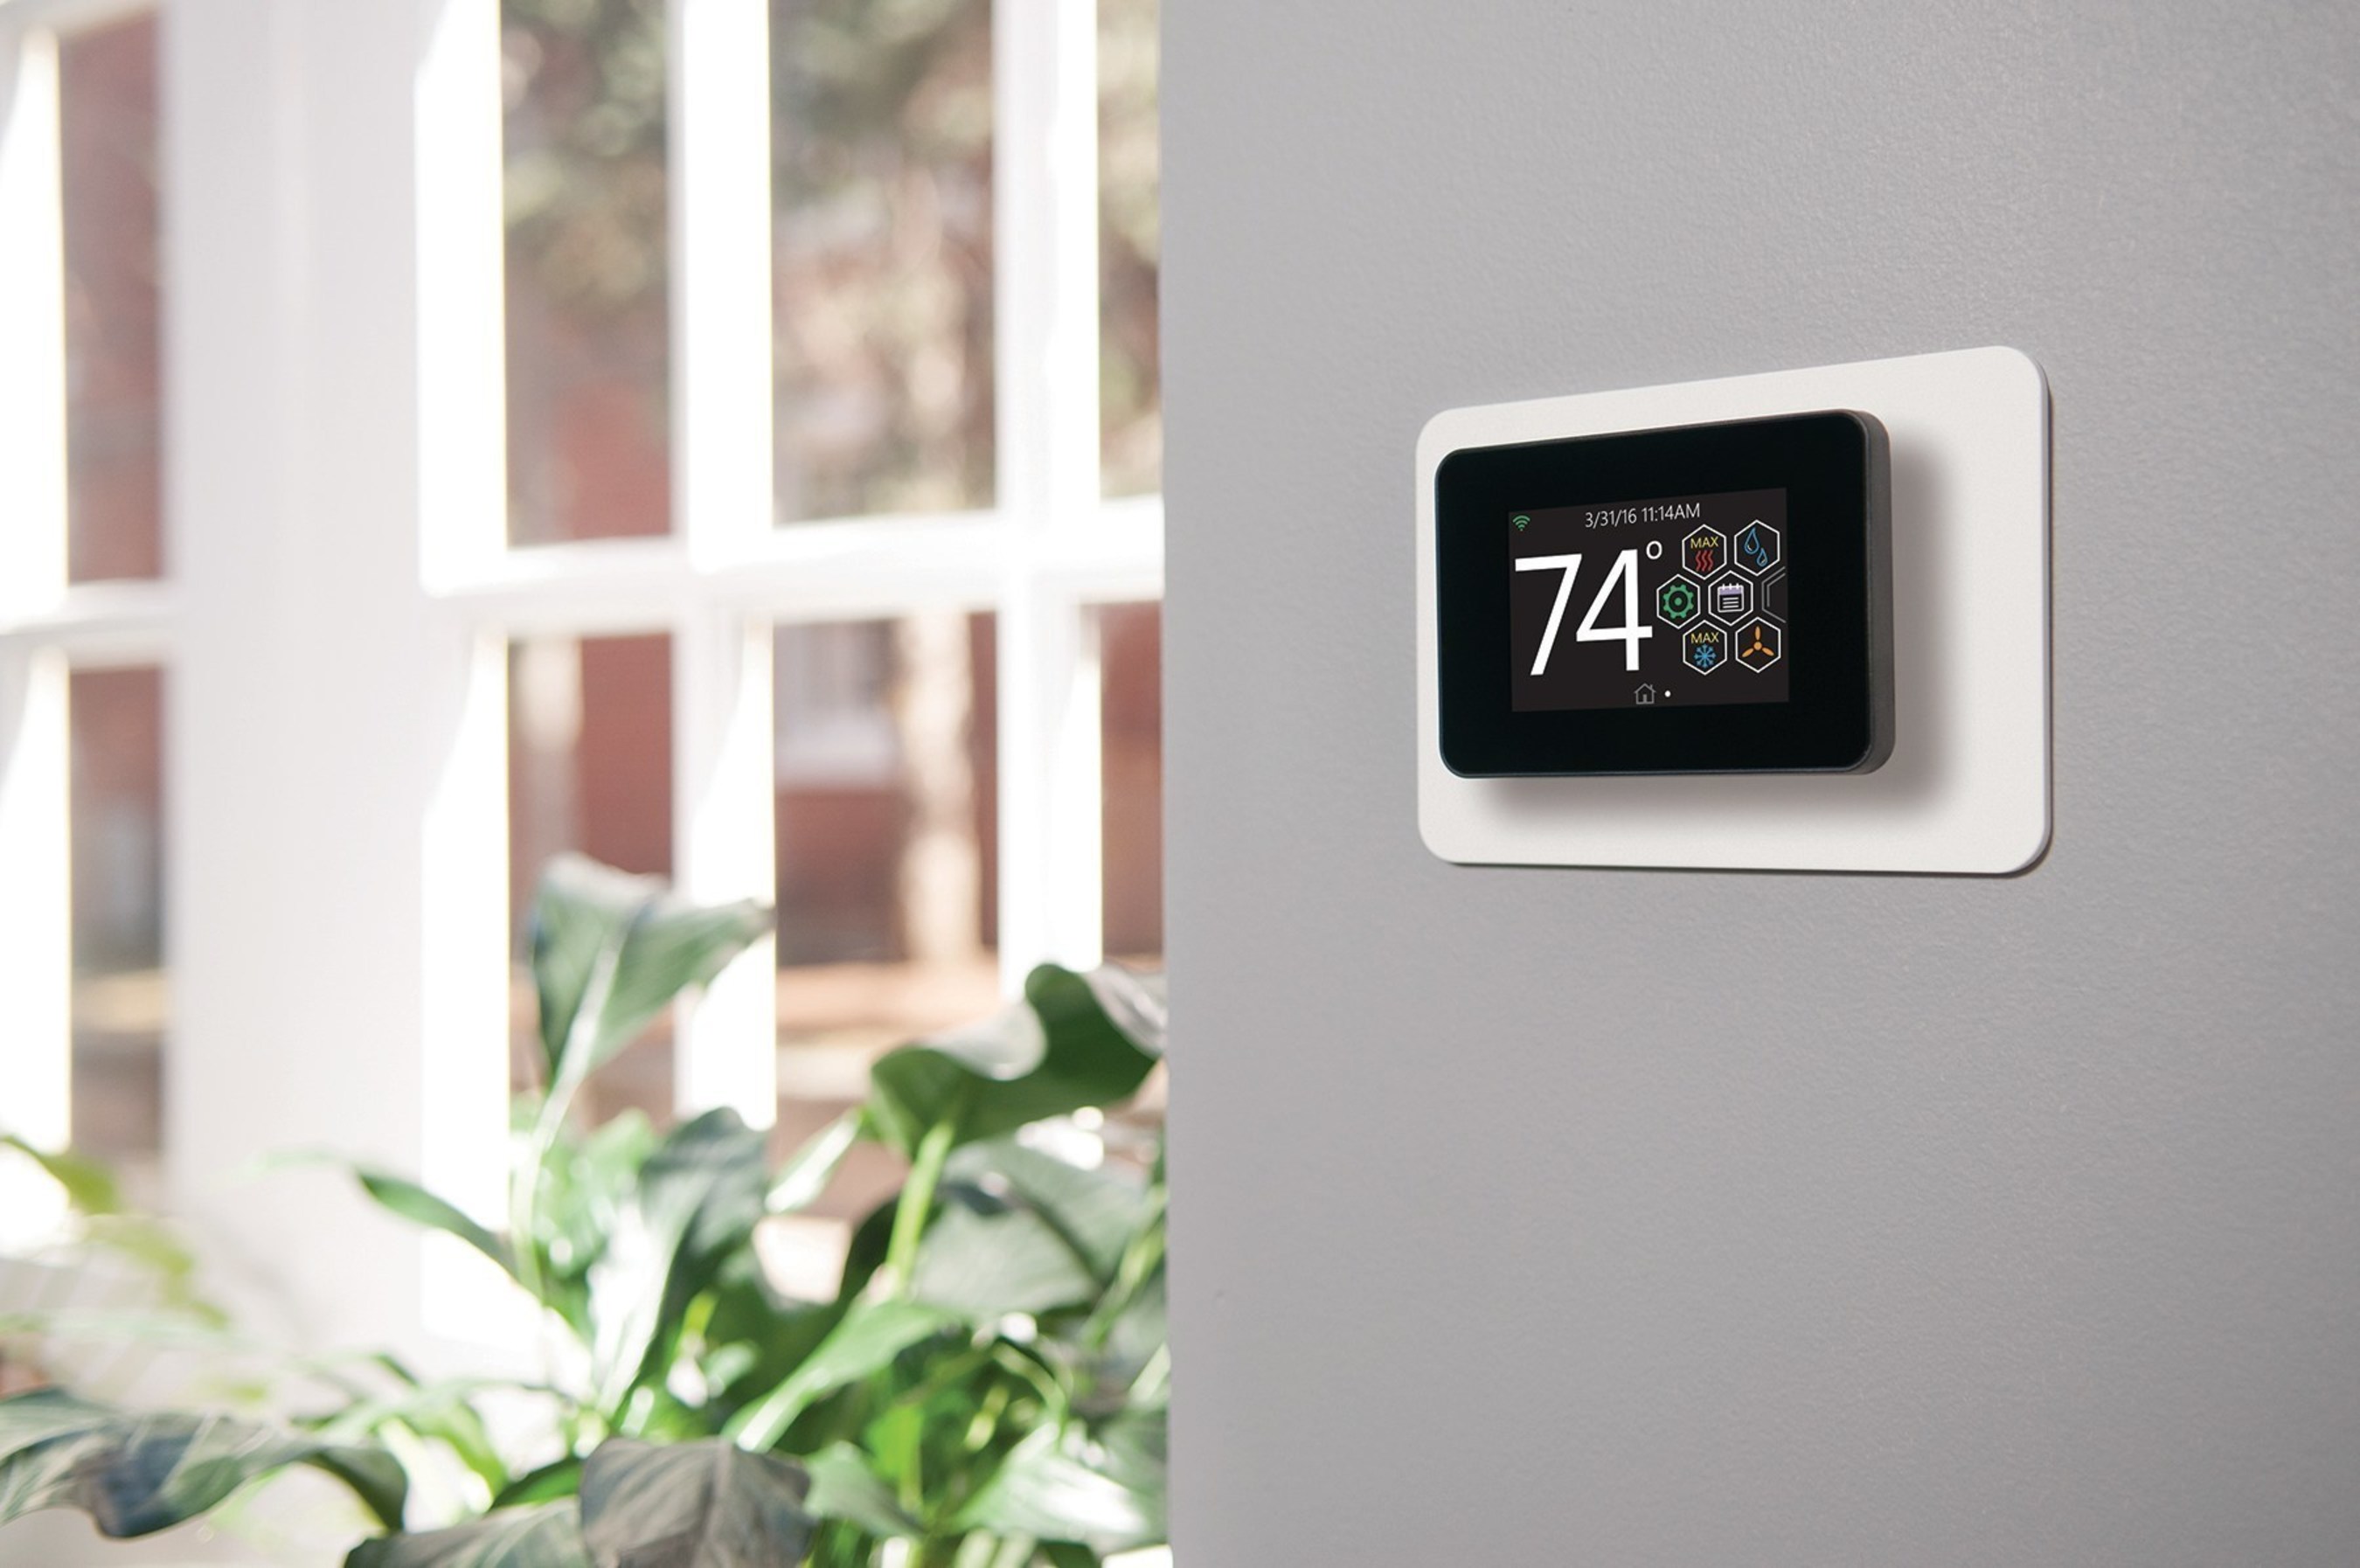 New Johnson Controls YORK(R) touch-screen thermostat seamlessly connects homeowners to their home comfort systems.